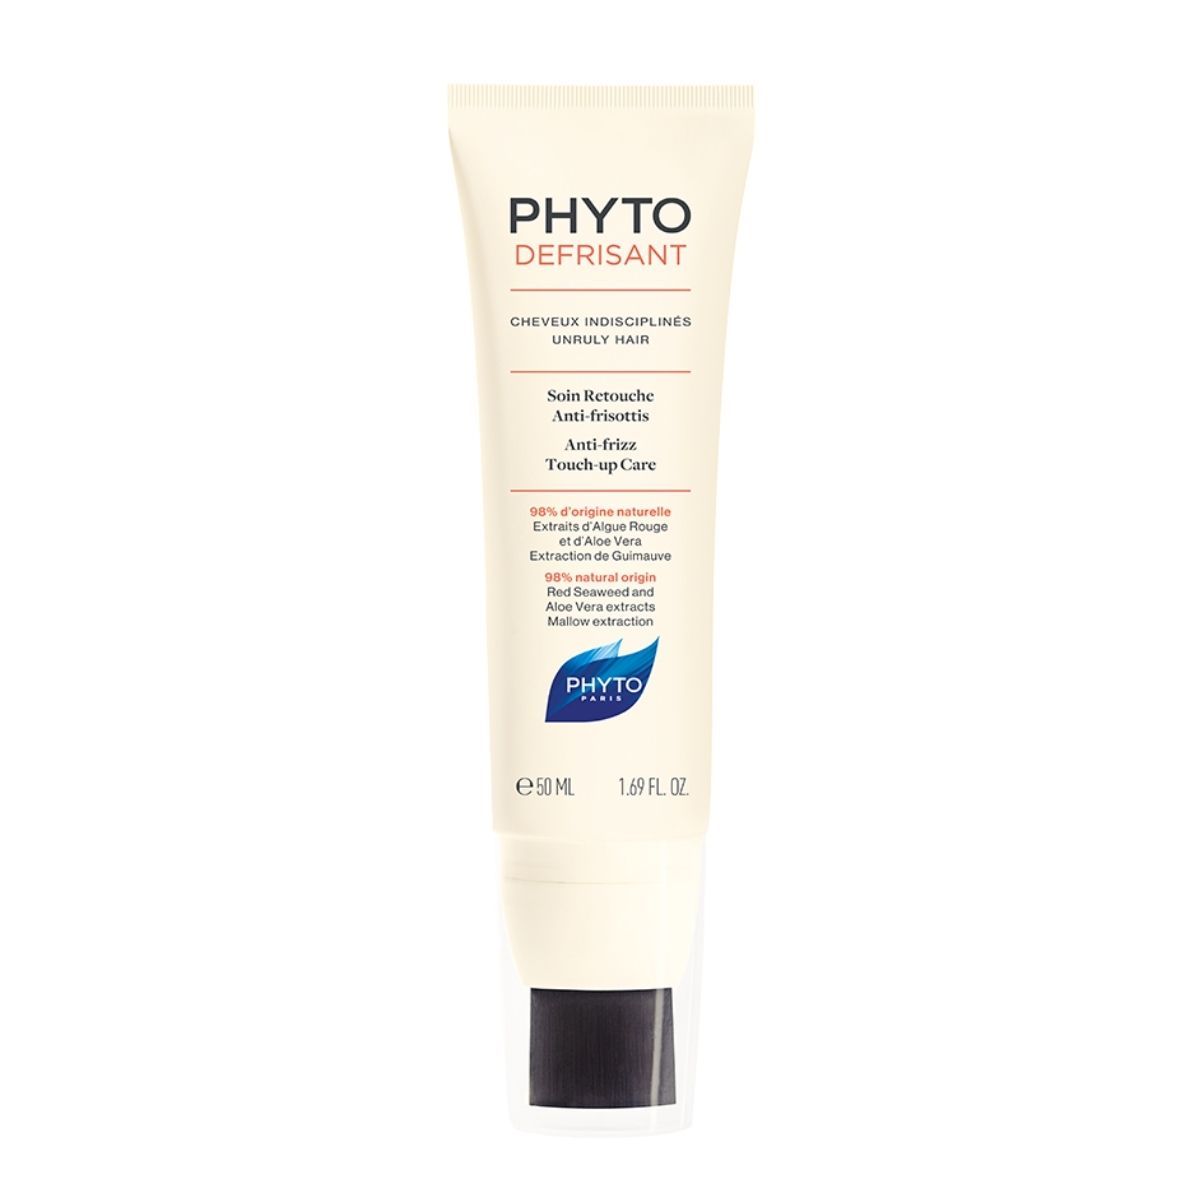 PHYTODEFRISANT Anti-Frizz Touch-Up care